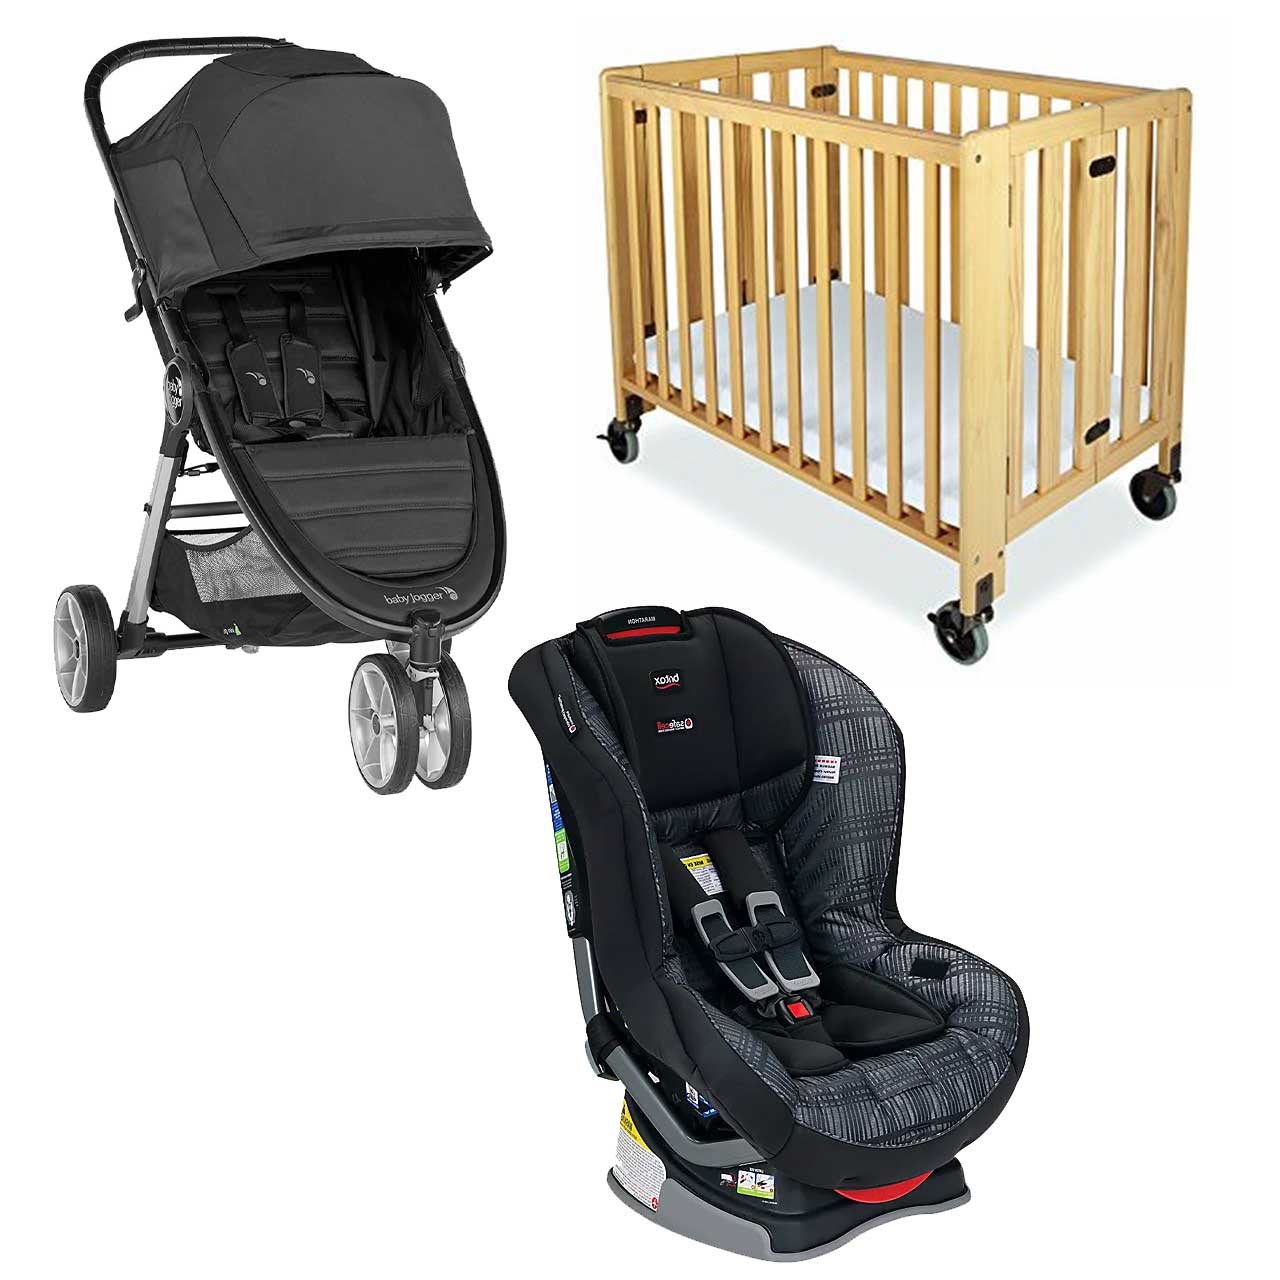 Compact Travel Package: Folding Crib, Mini Stroller & Convertible Car Seat